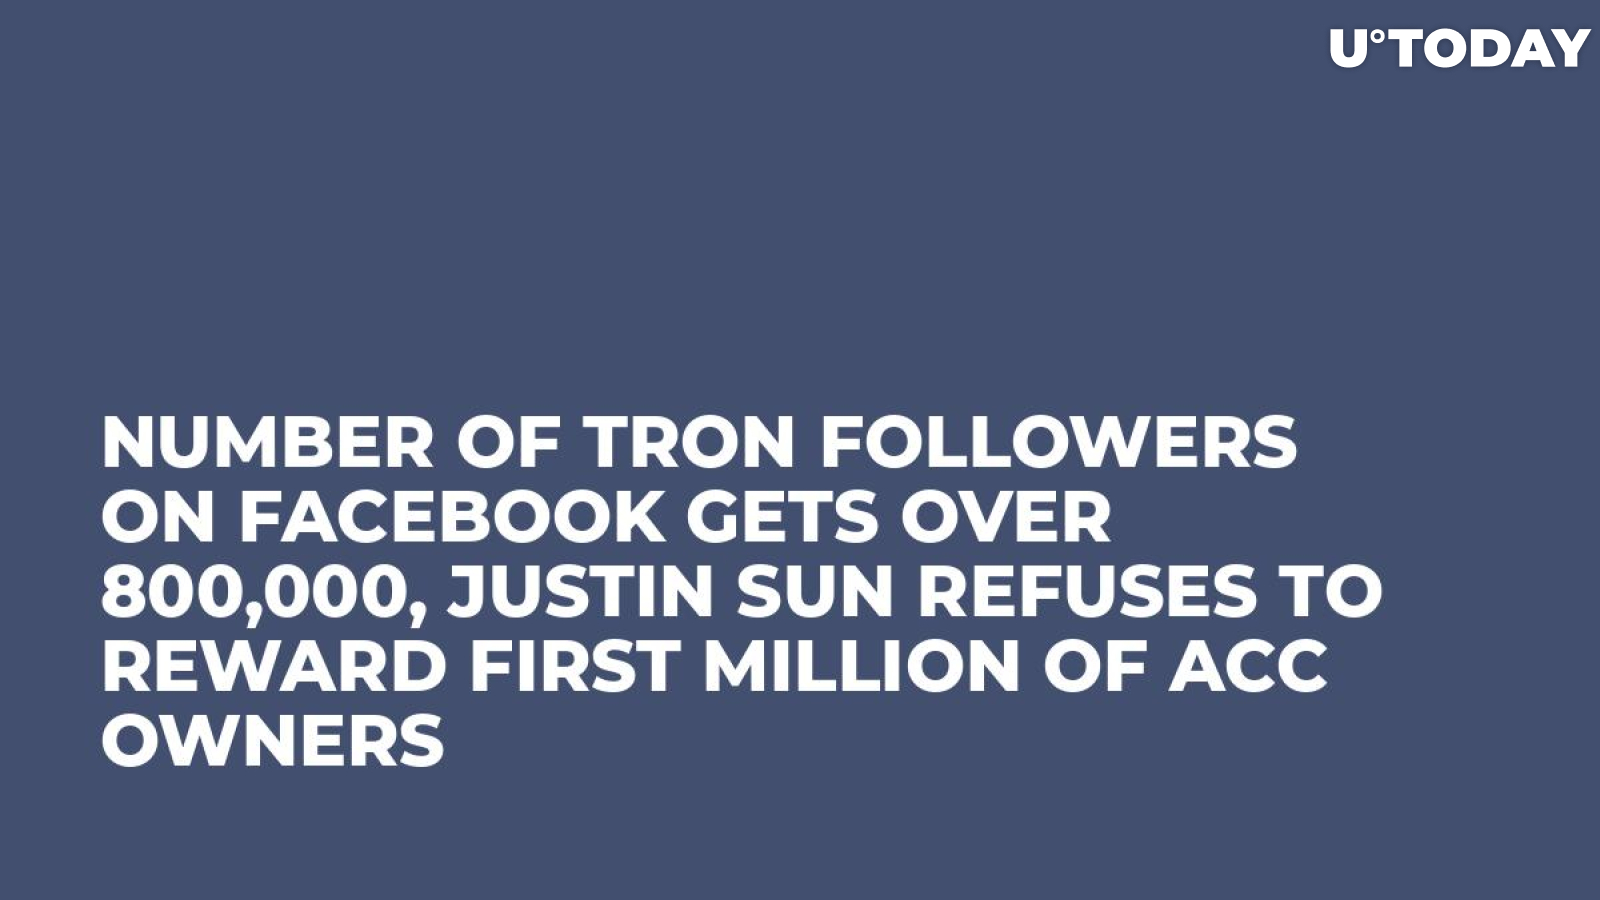 Number of Tron Followers on Facebook Gets Over 800,000, Justin Sun Refuses to Reward First Million of Acc Owners